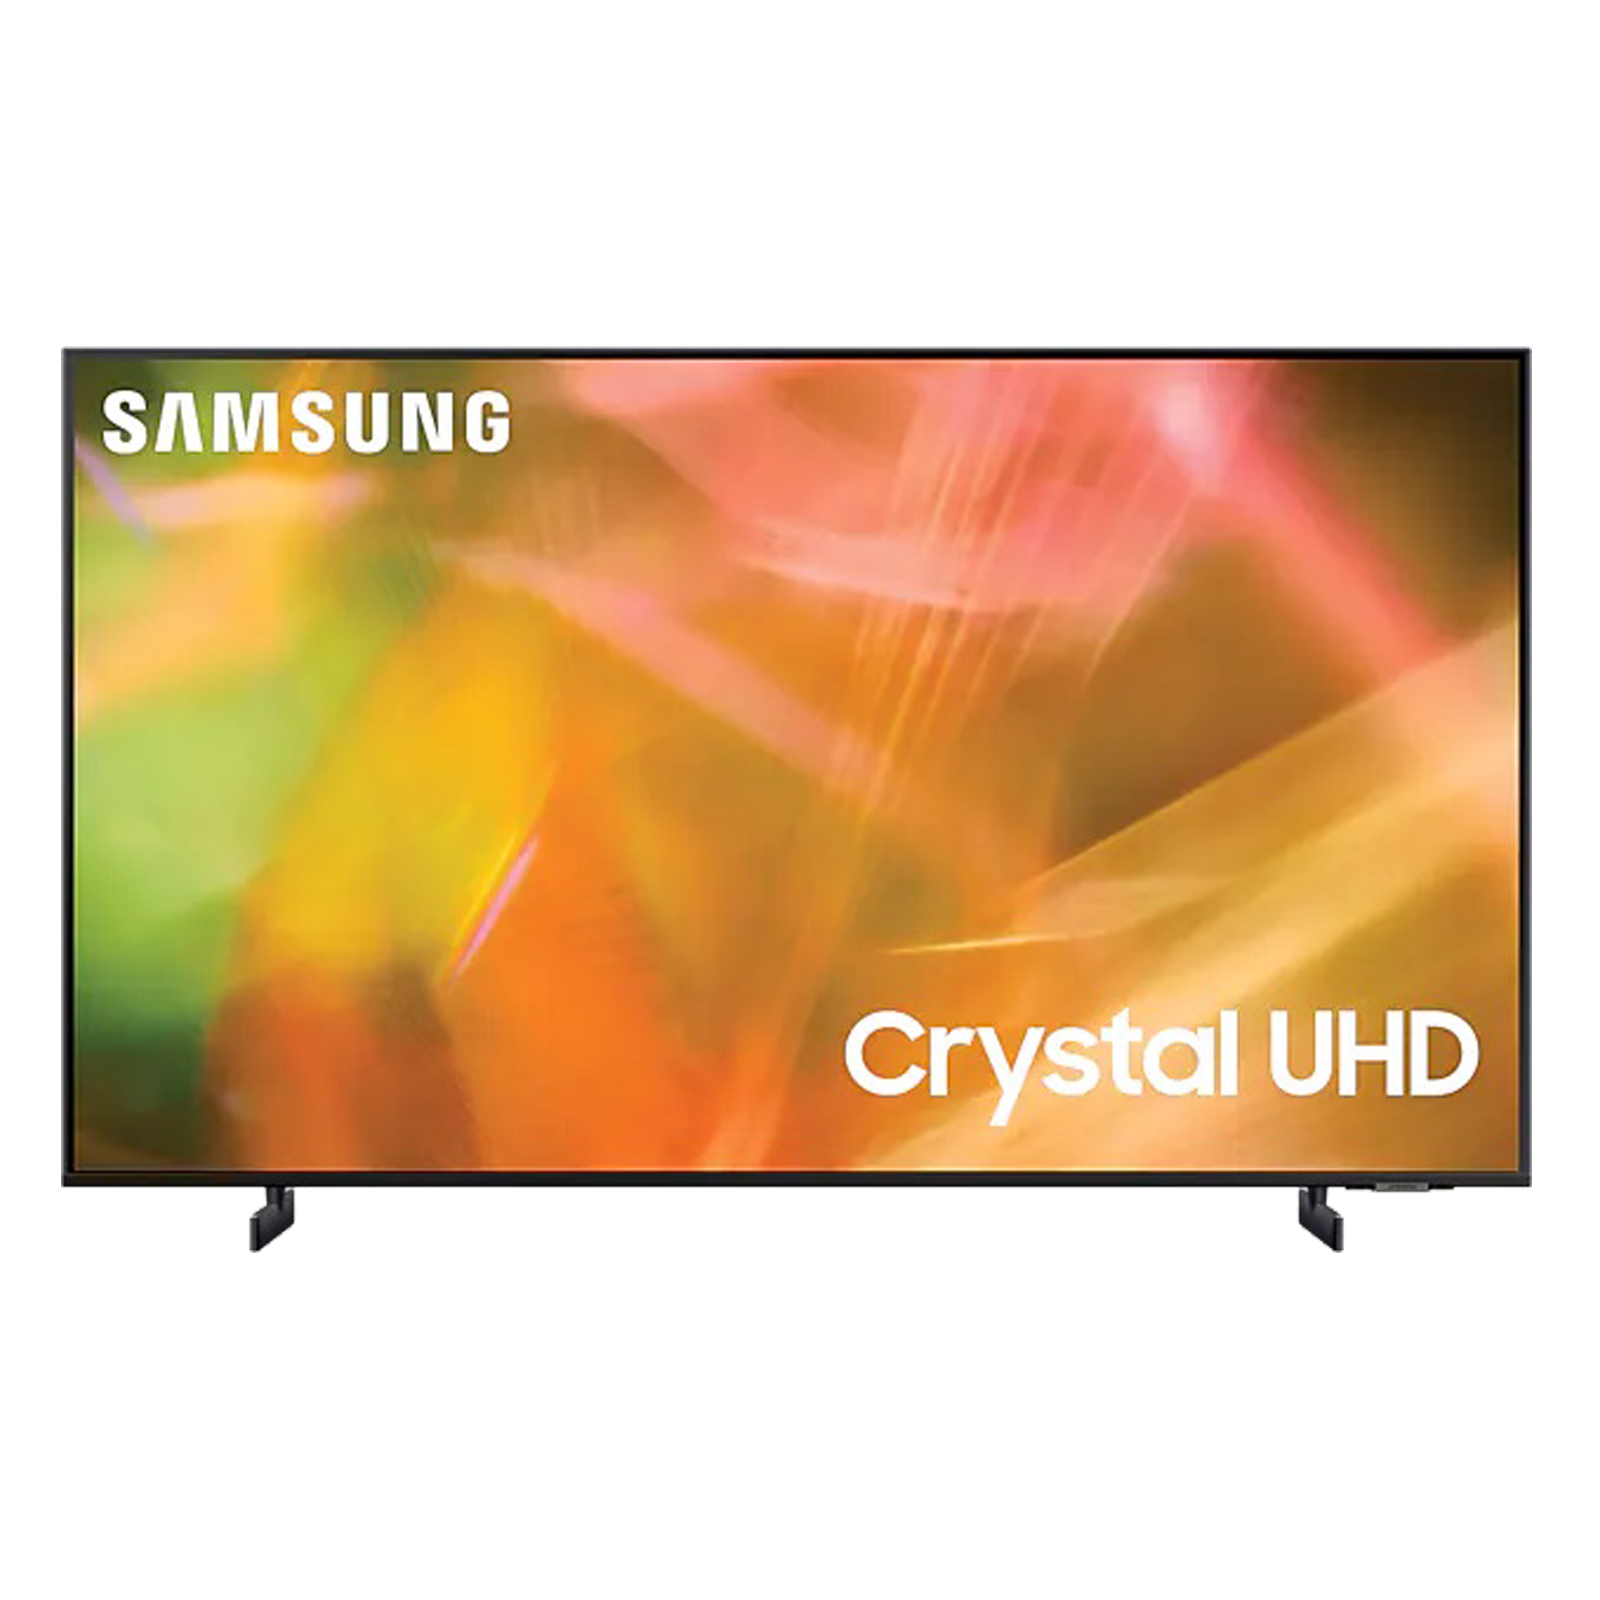 Croma Retail - Samsung 8 Series 138cm (55 Inch) Ultra HD 4K LED Smart TV (Multi Voice Assistant Supported, UA55AU8200KLXL, Titan Grey)